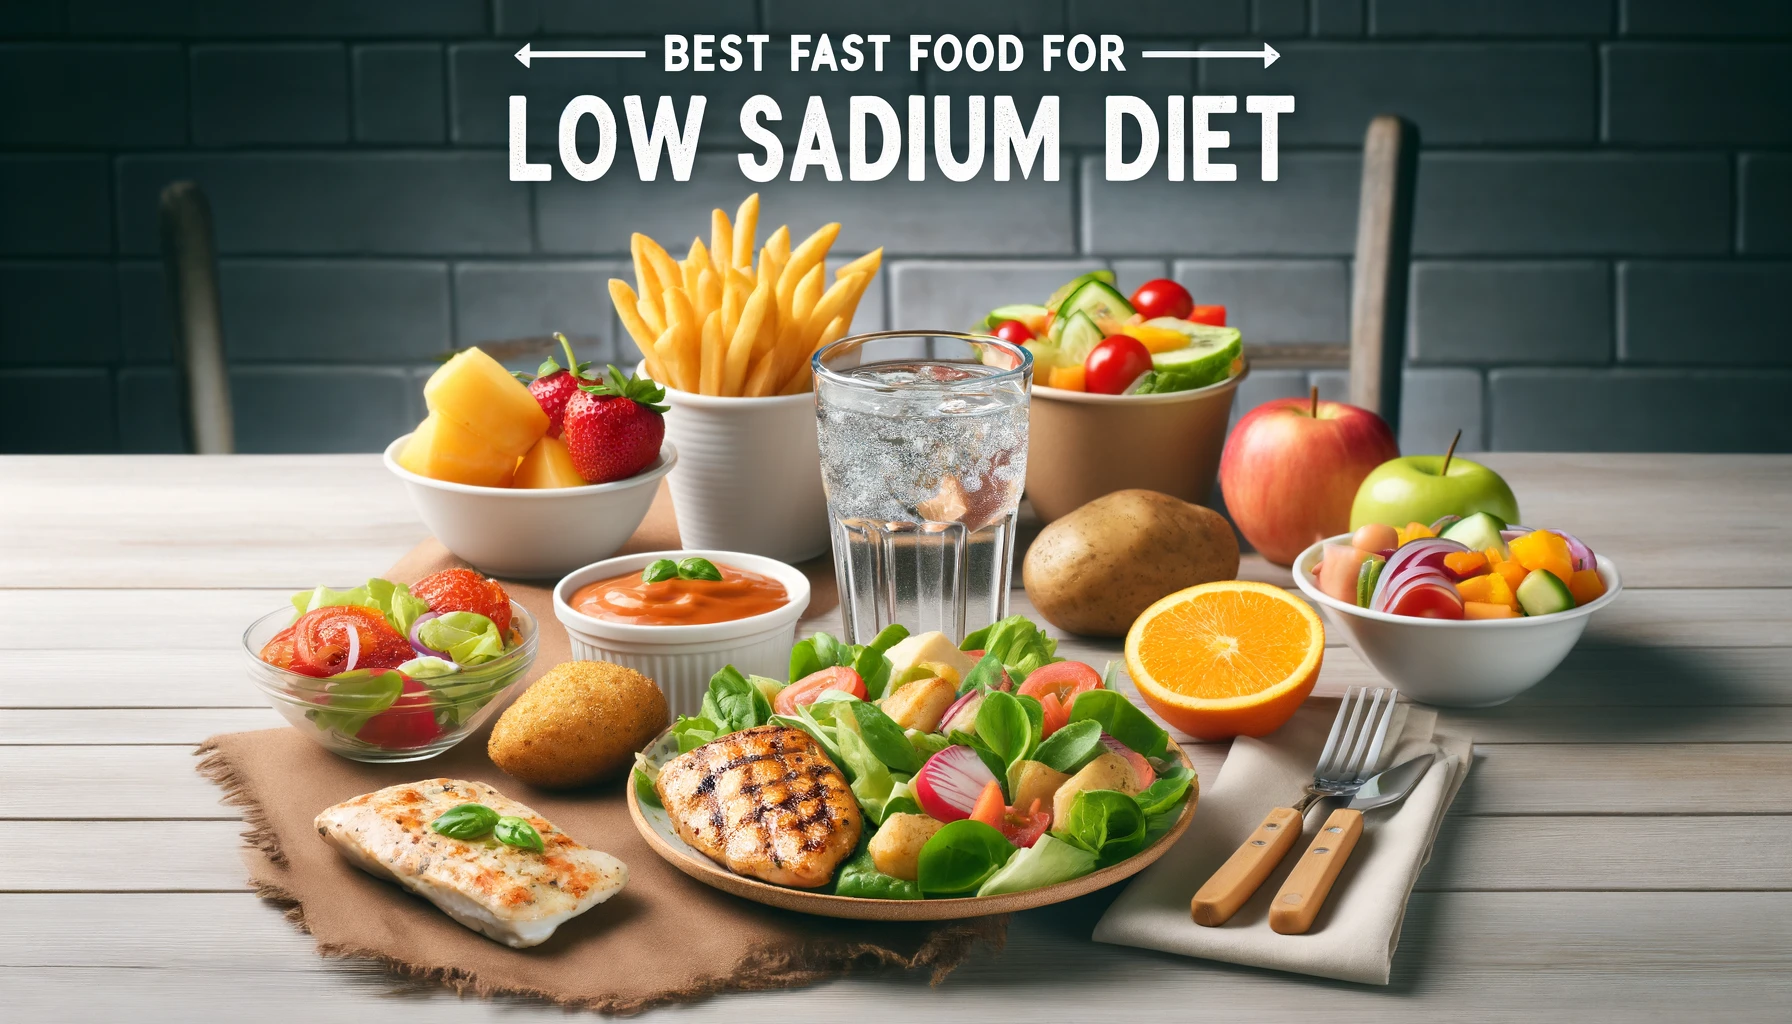 Best fast food for low sodium diet